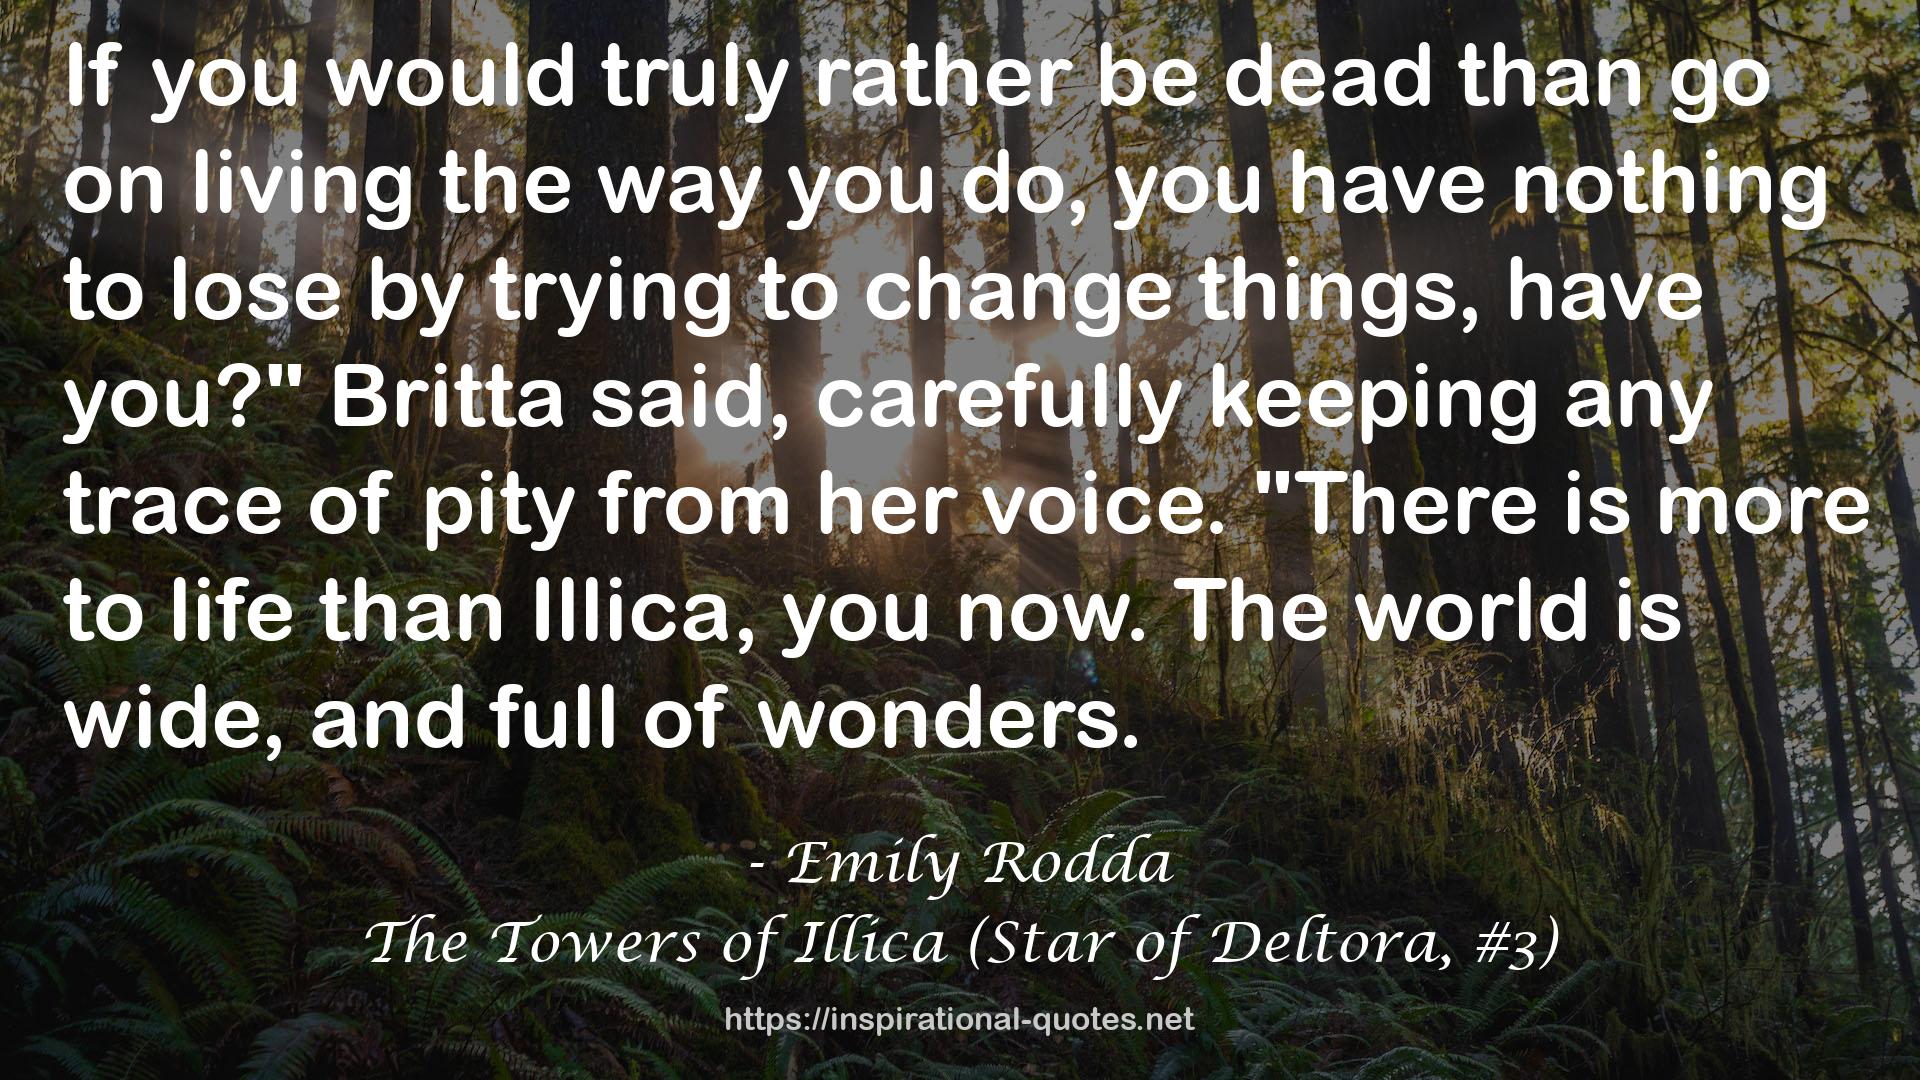 The Towers of Illica (Star of Deltora, #3) QUOTES